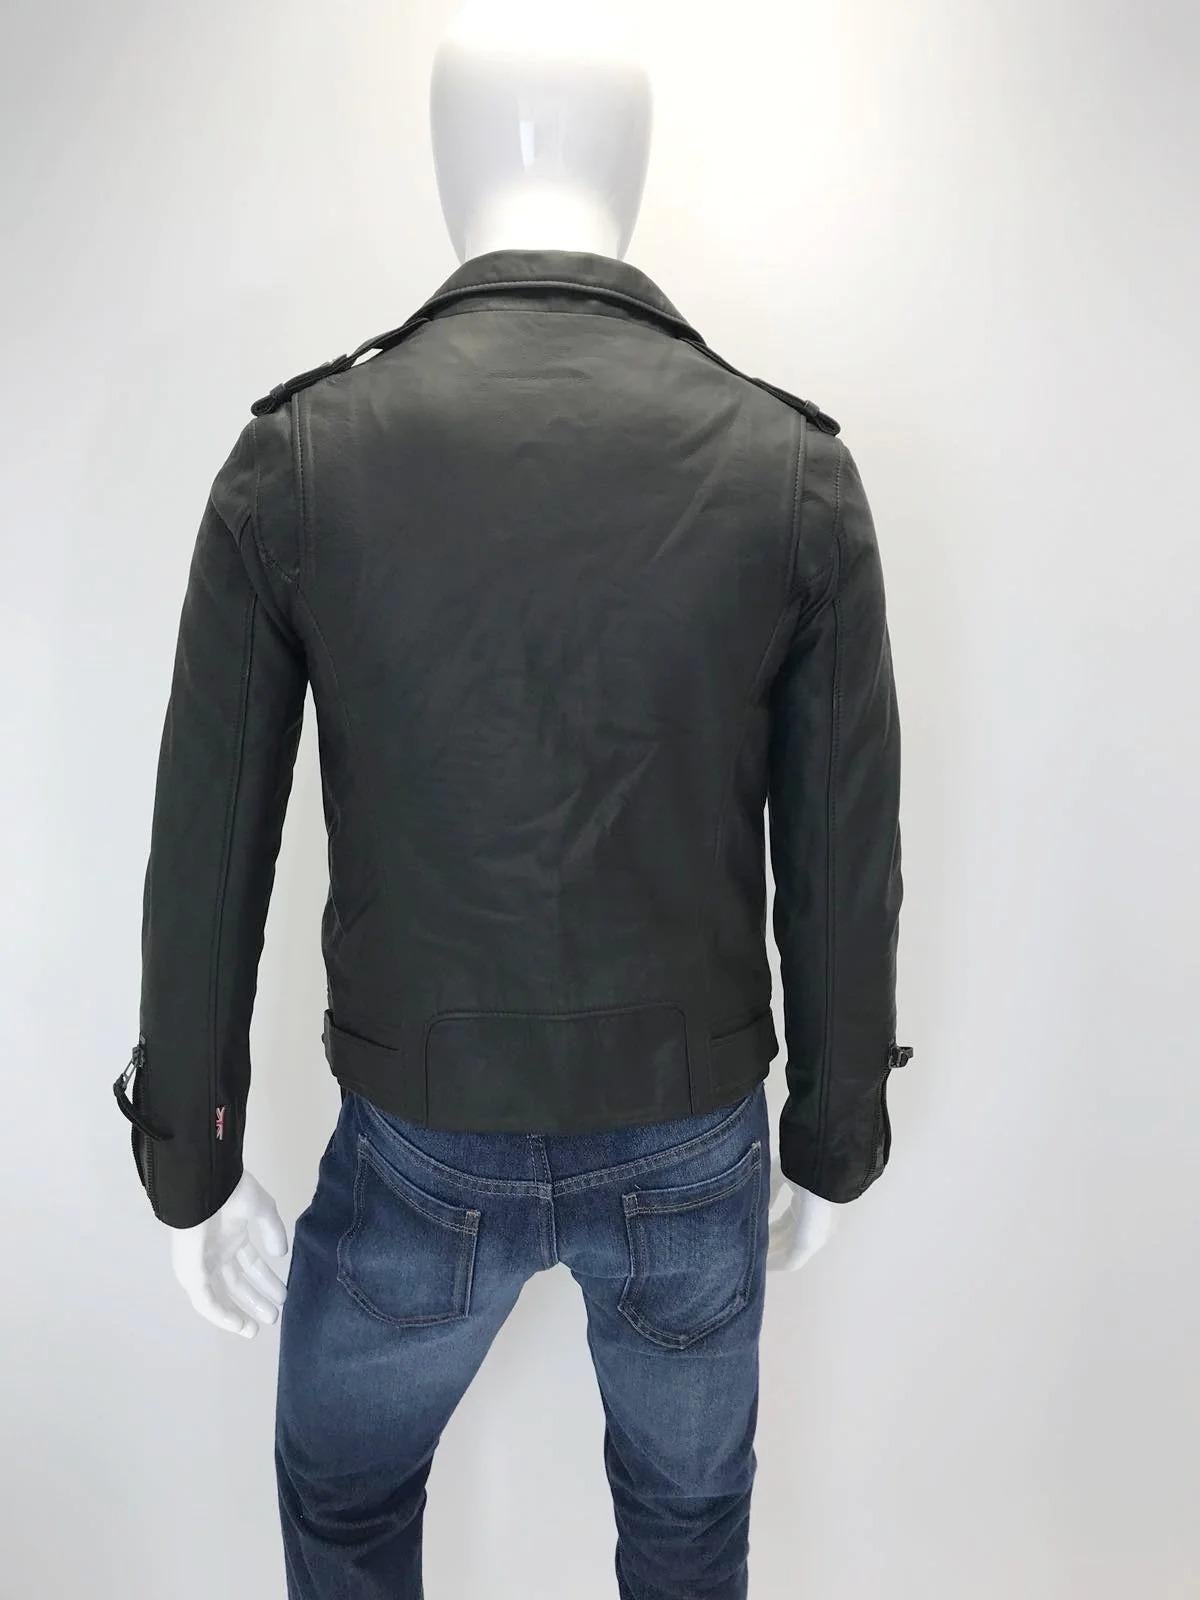 Boda Skins Leather Biker Jacket In Excellent Condition For Sale In London, GB